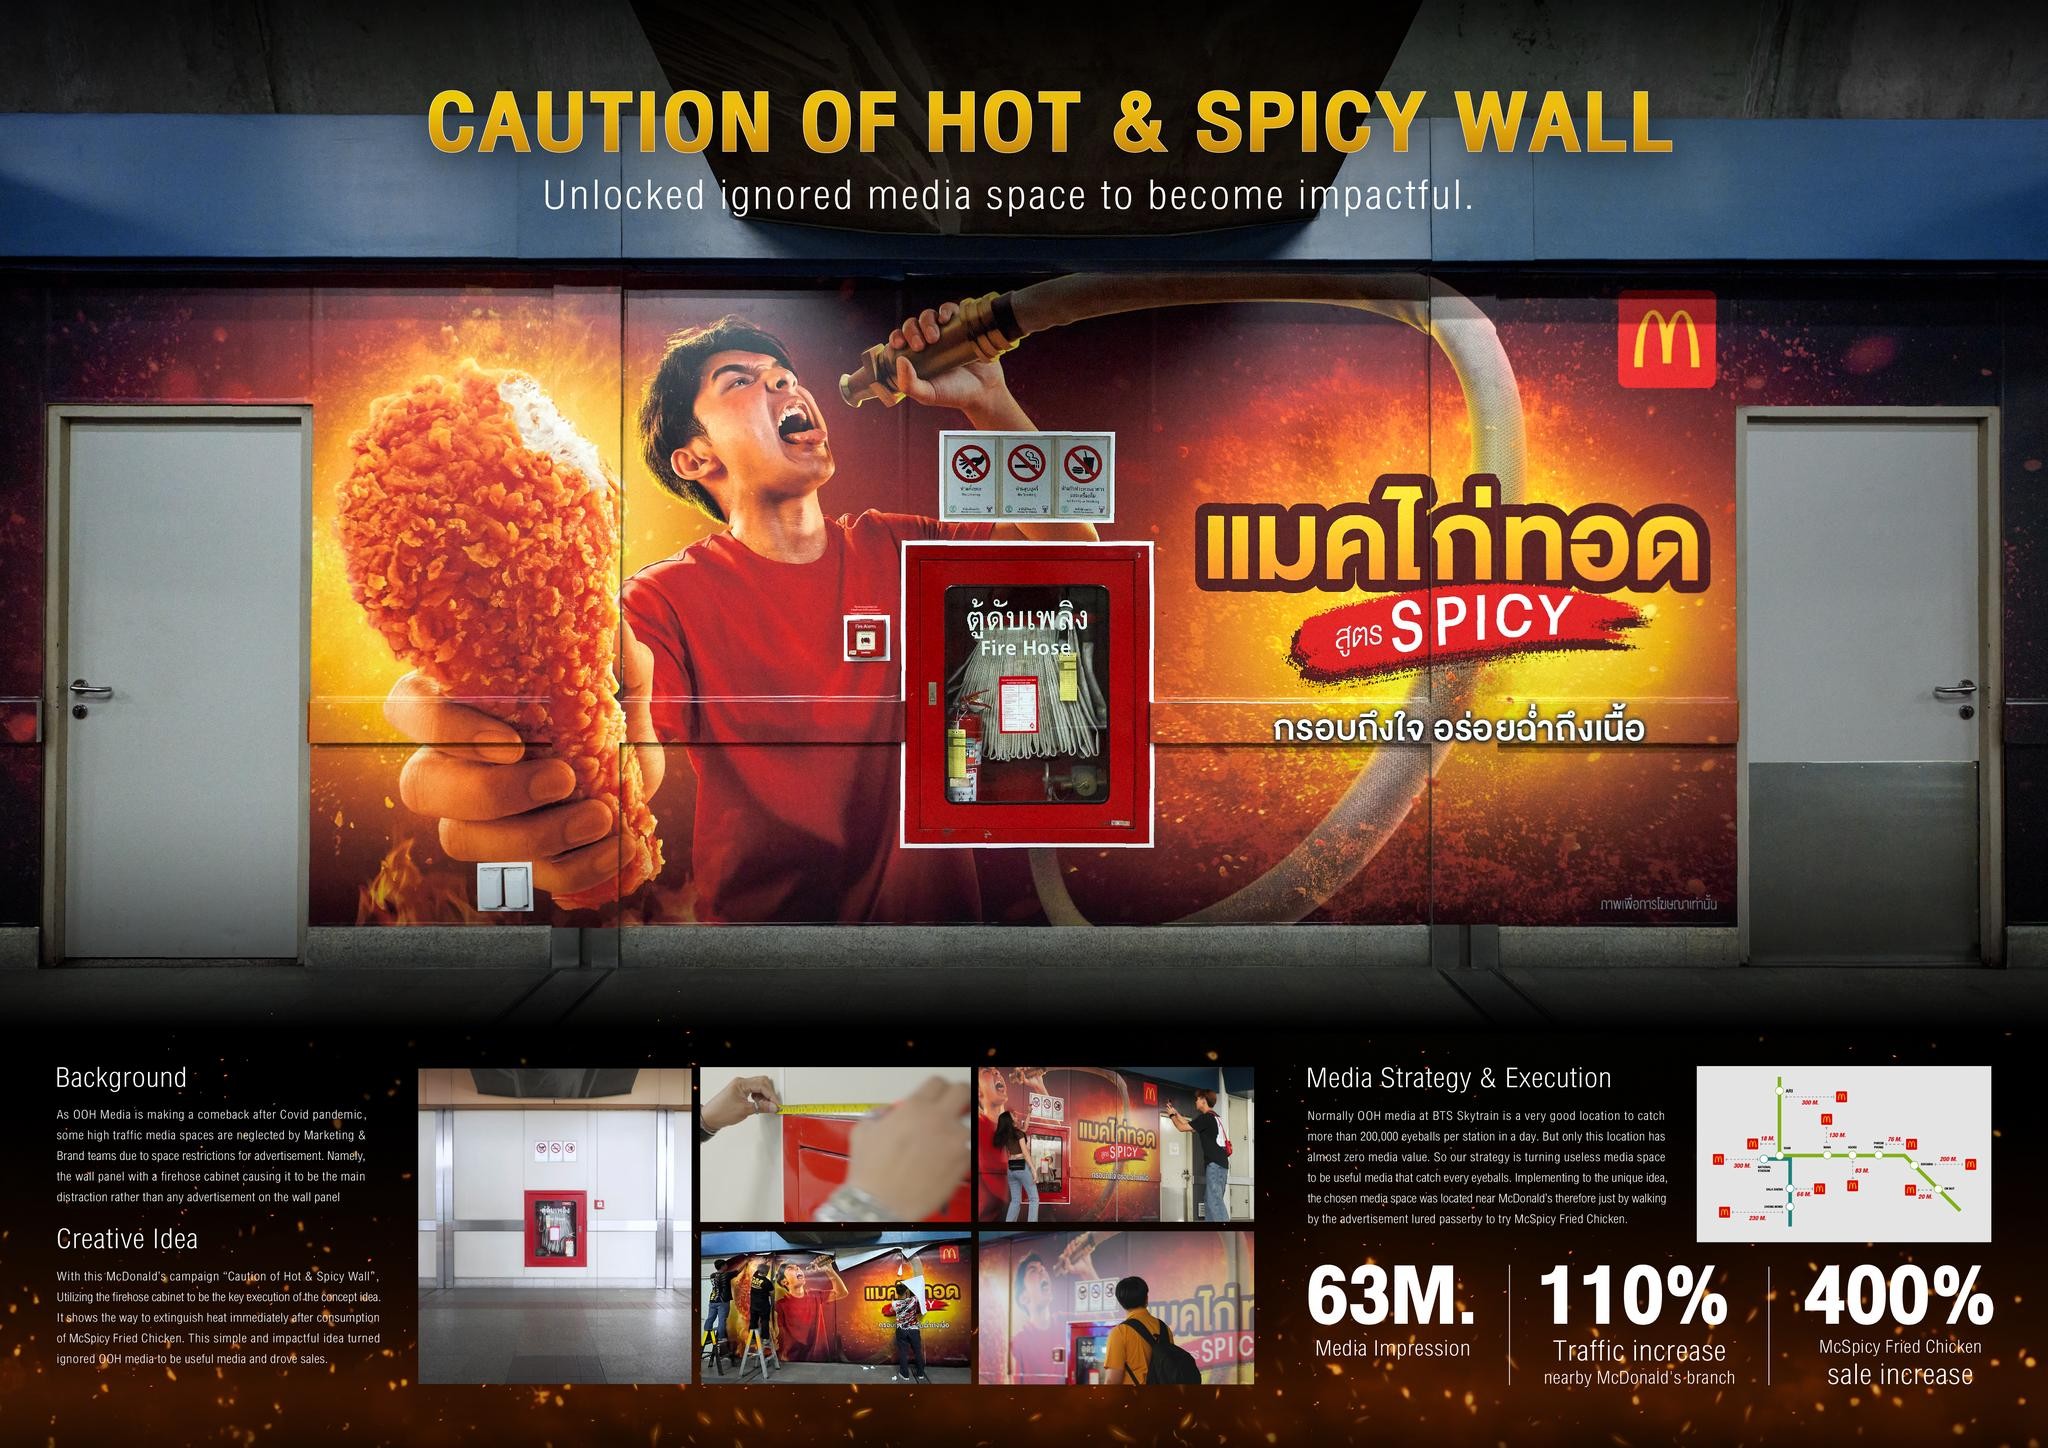 CAUTION OF HOT & SPICY WALL